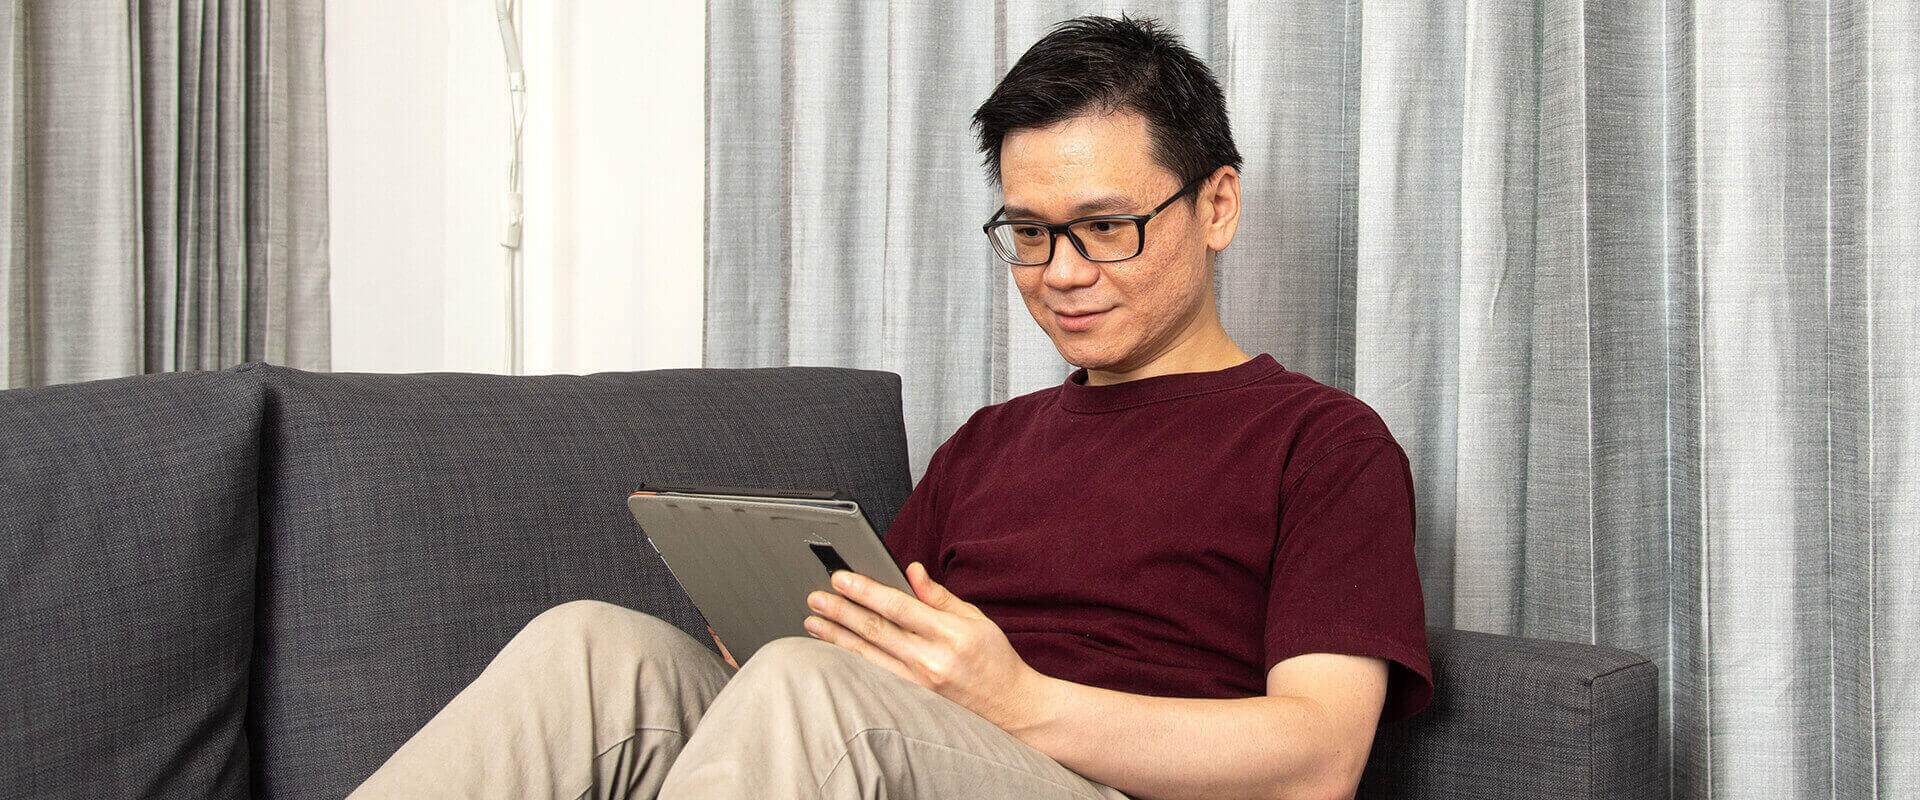 A man looking at a tablet on a sofa